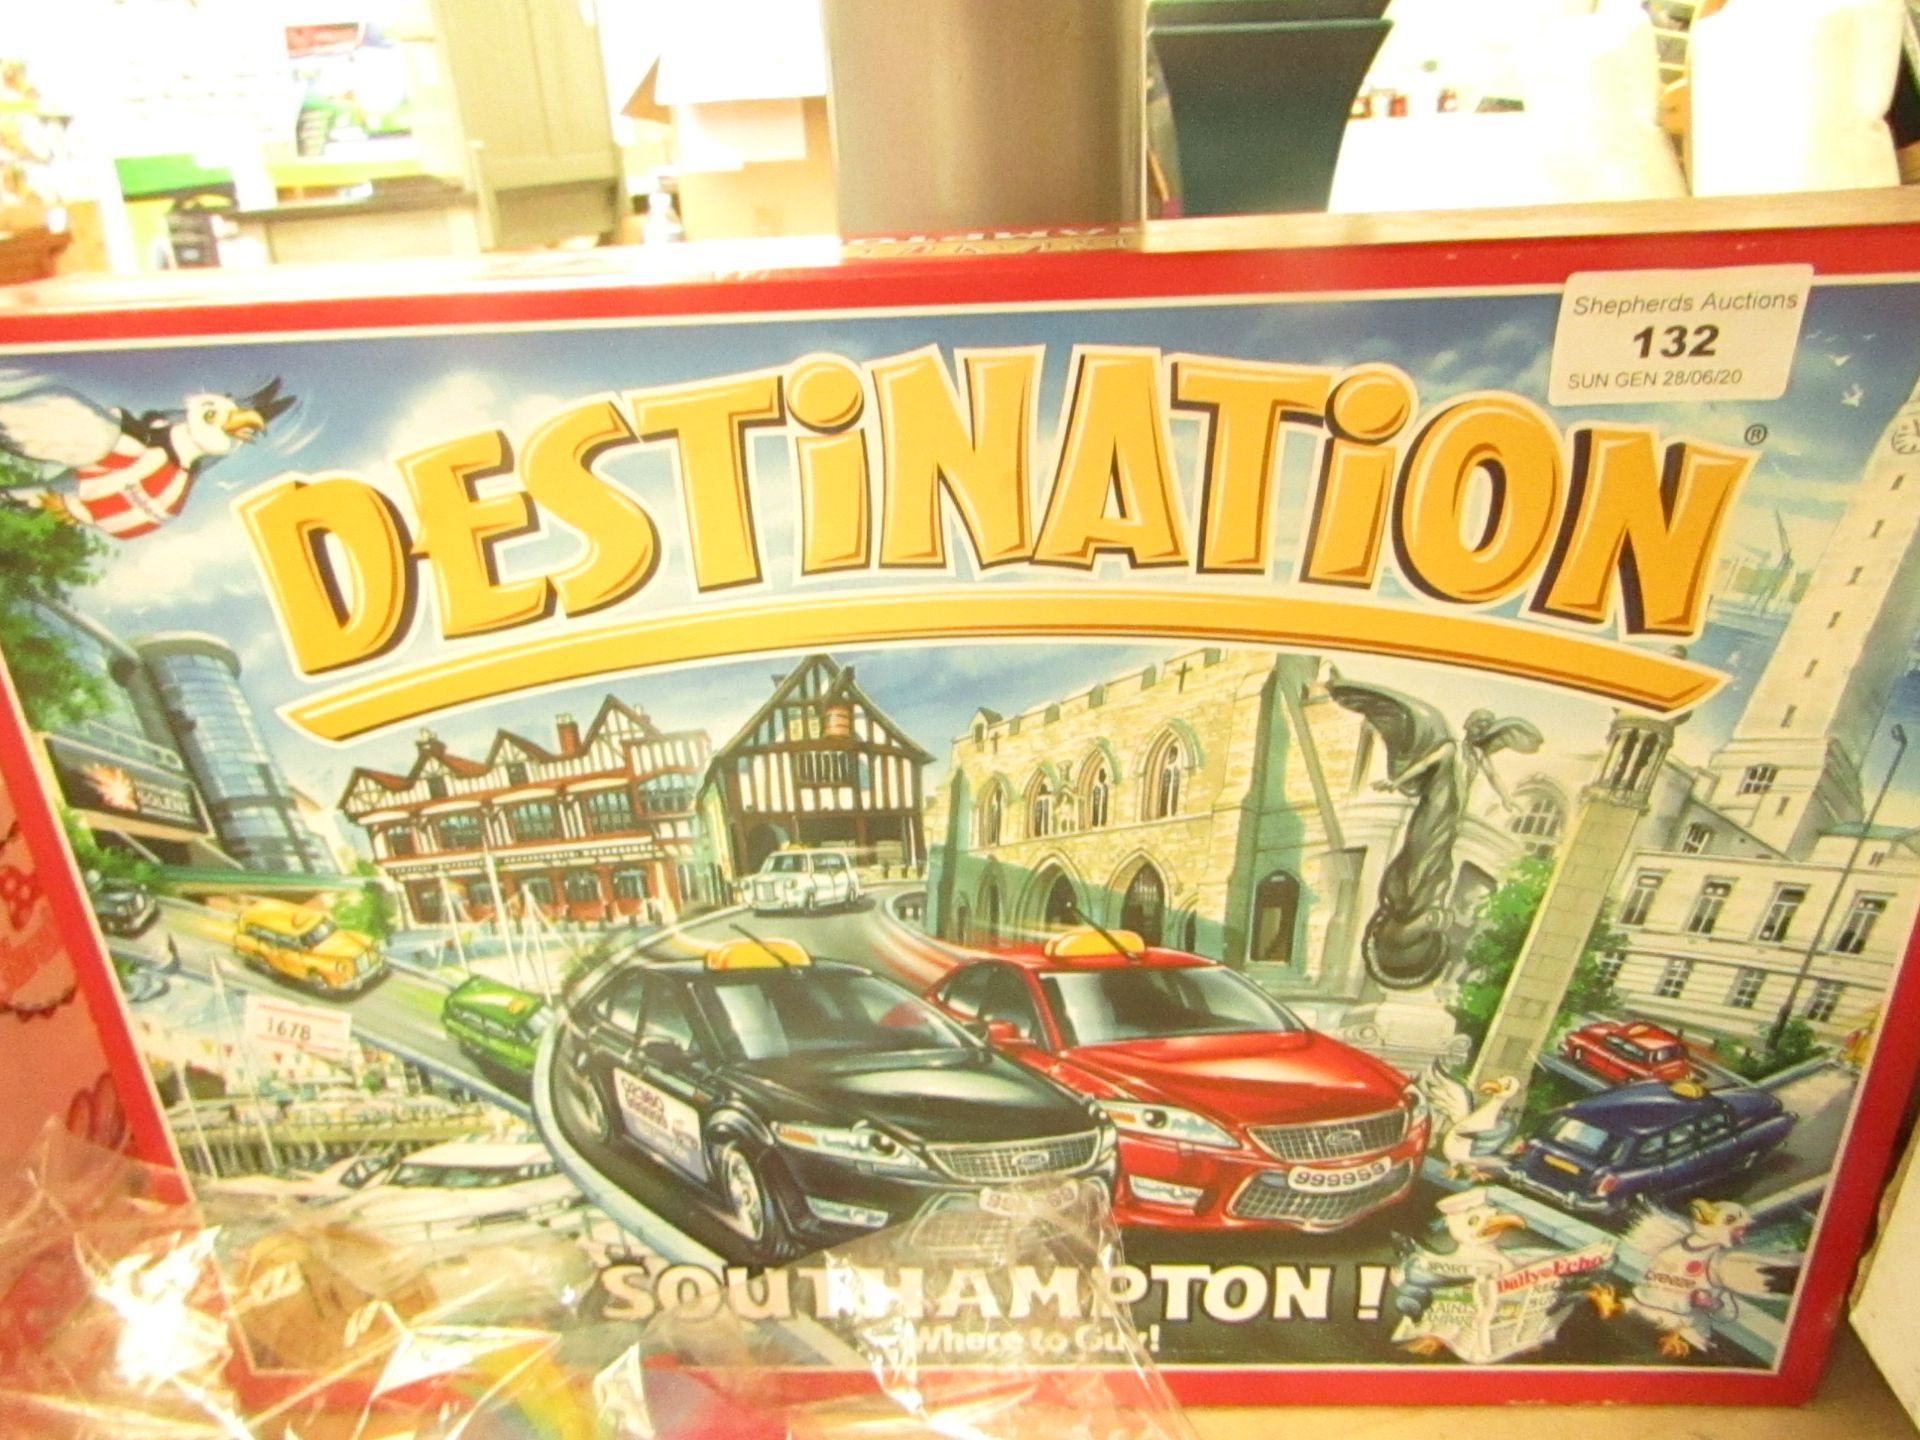 Destination Taxi game where you travel through London in your own Taxi.Boxed